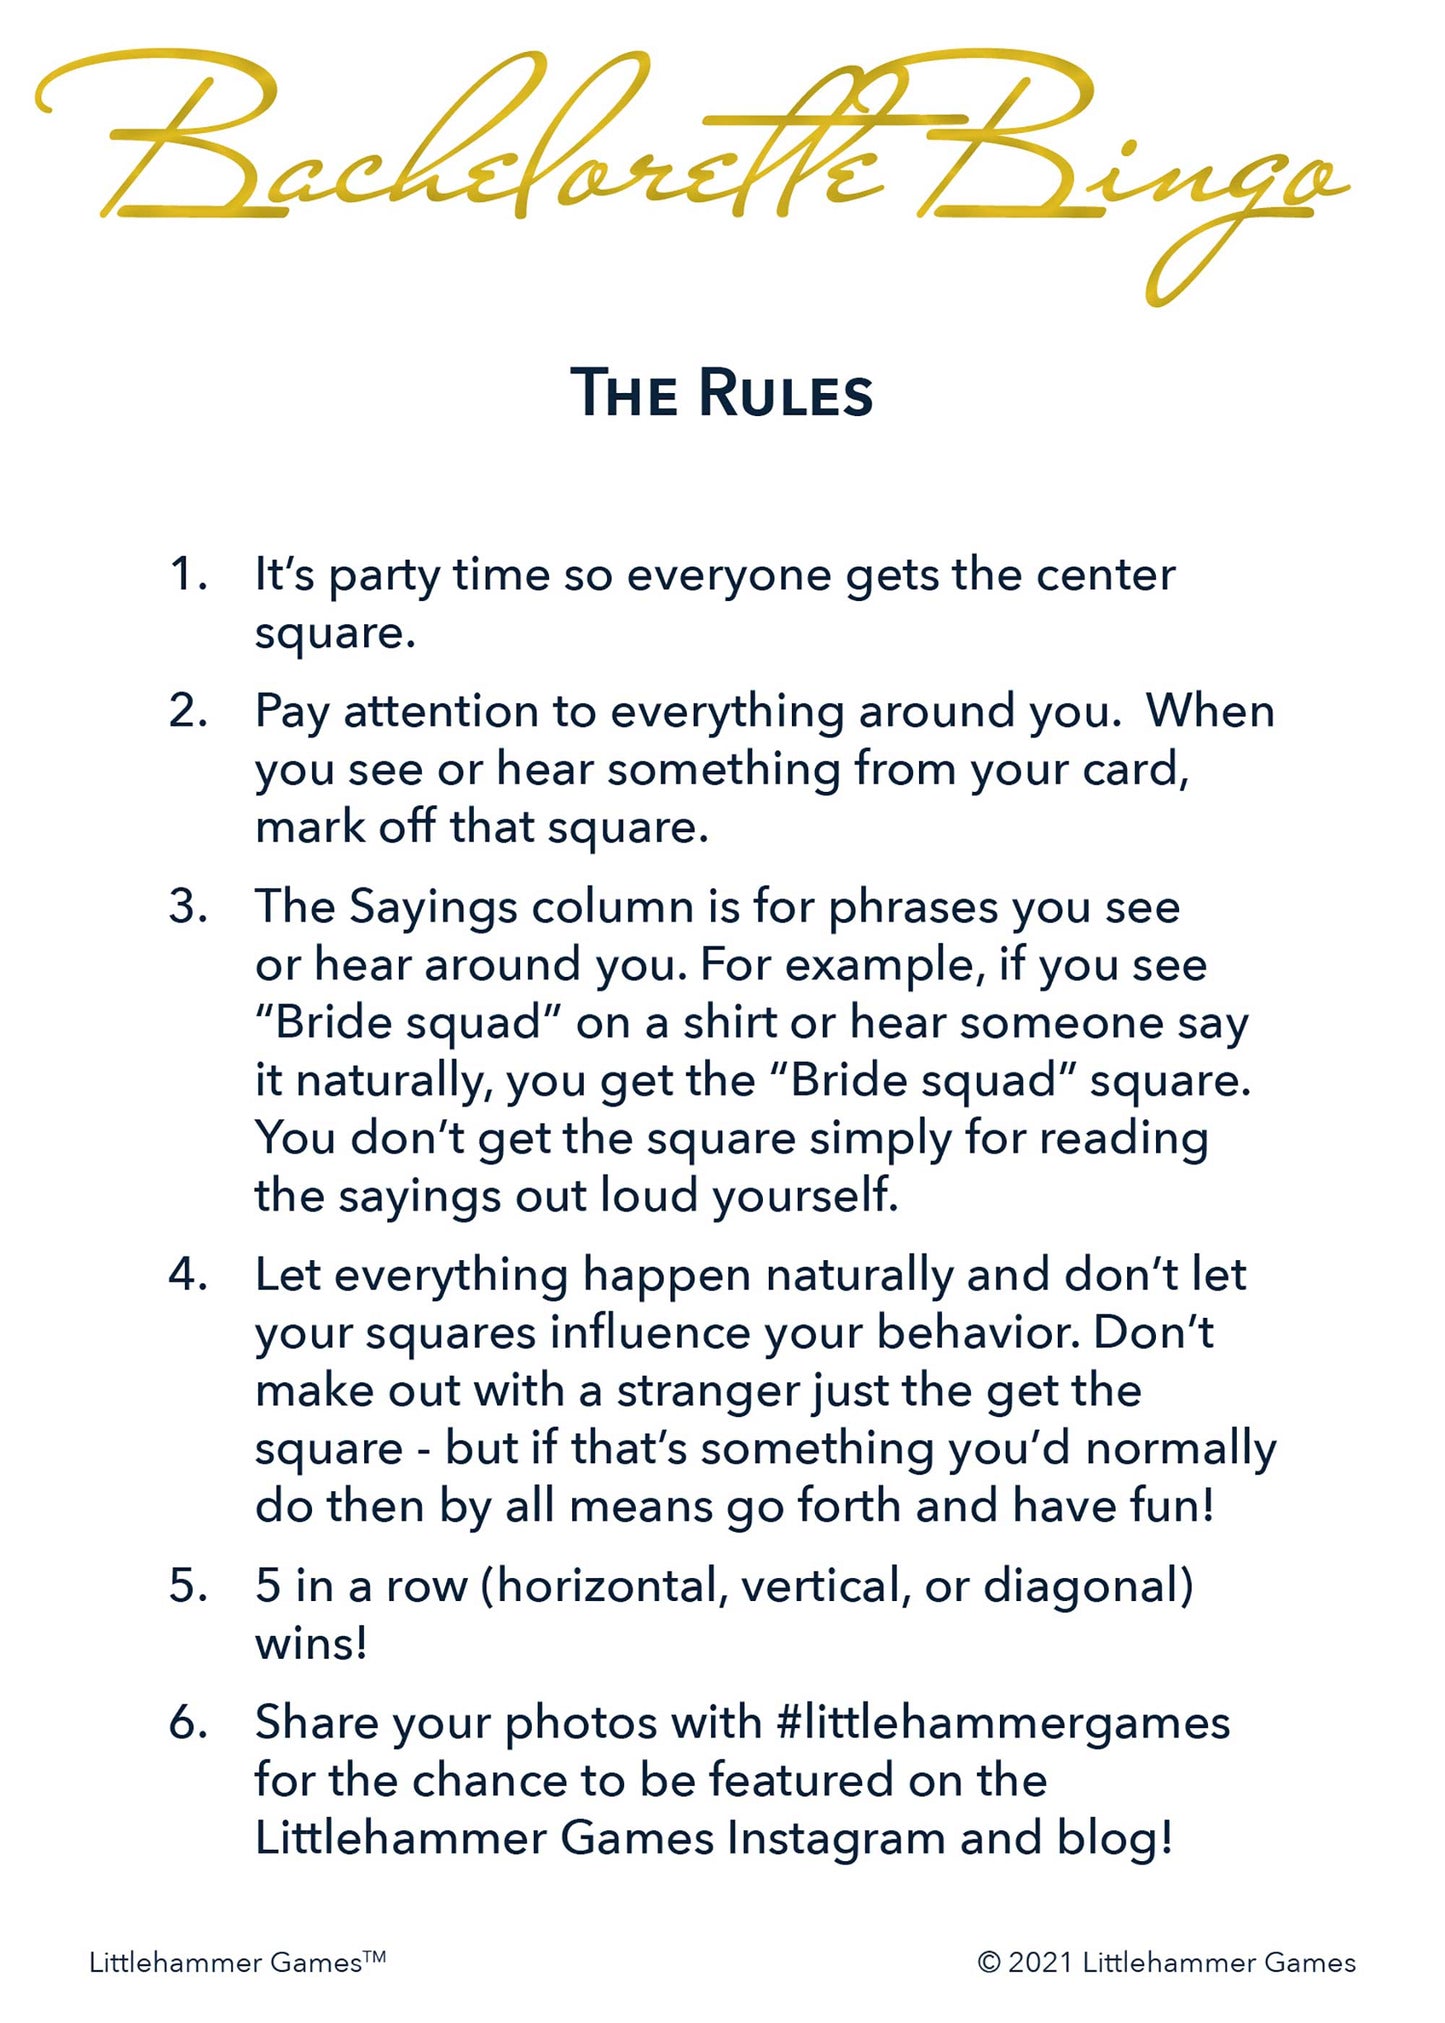 Bachelorette Bingo rules card with gold text on a white background